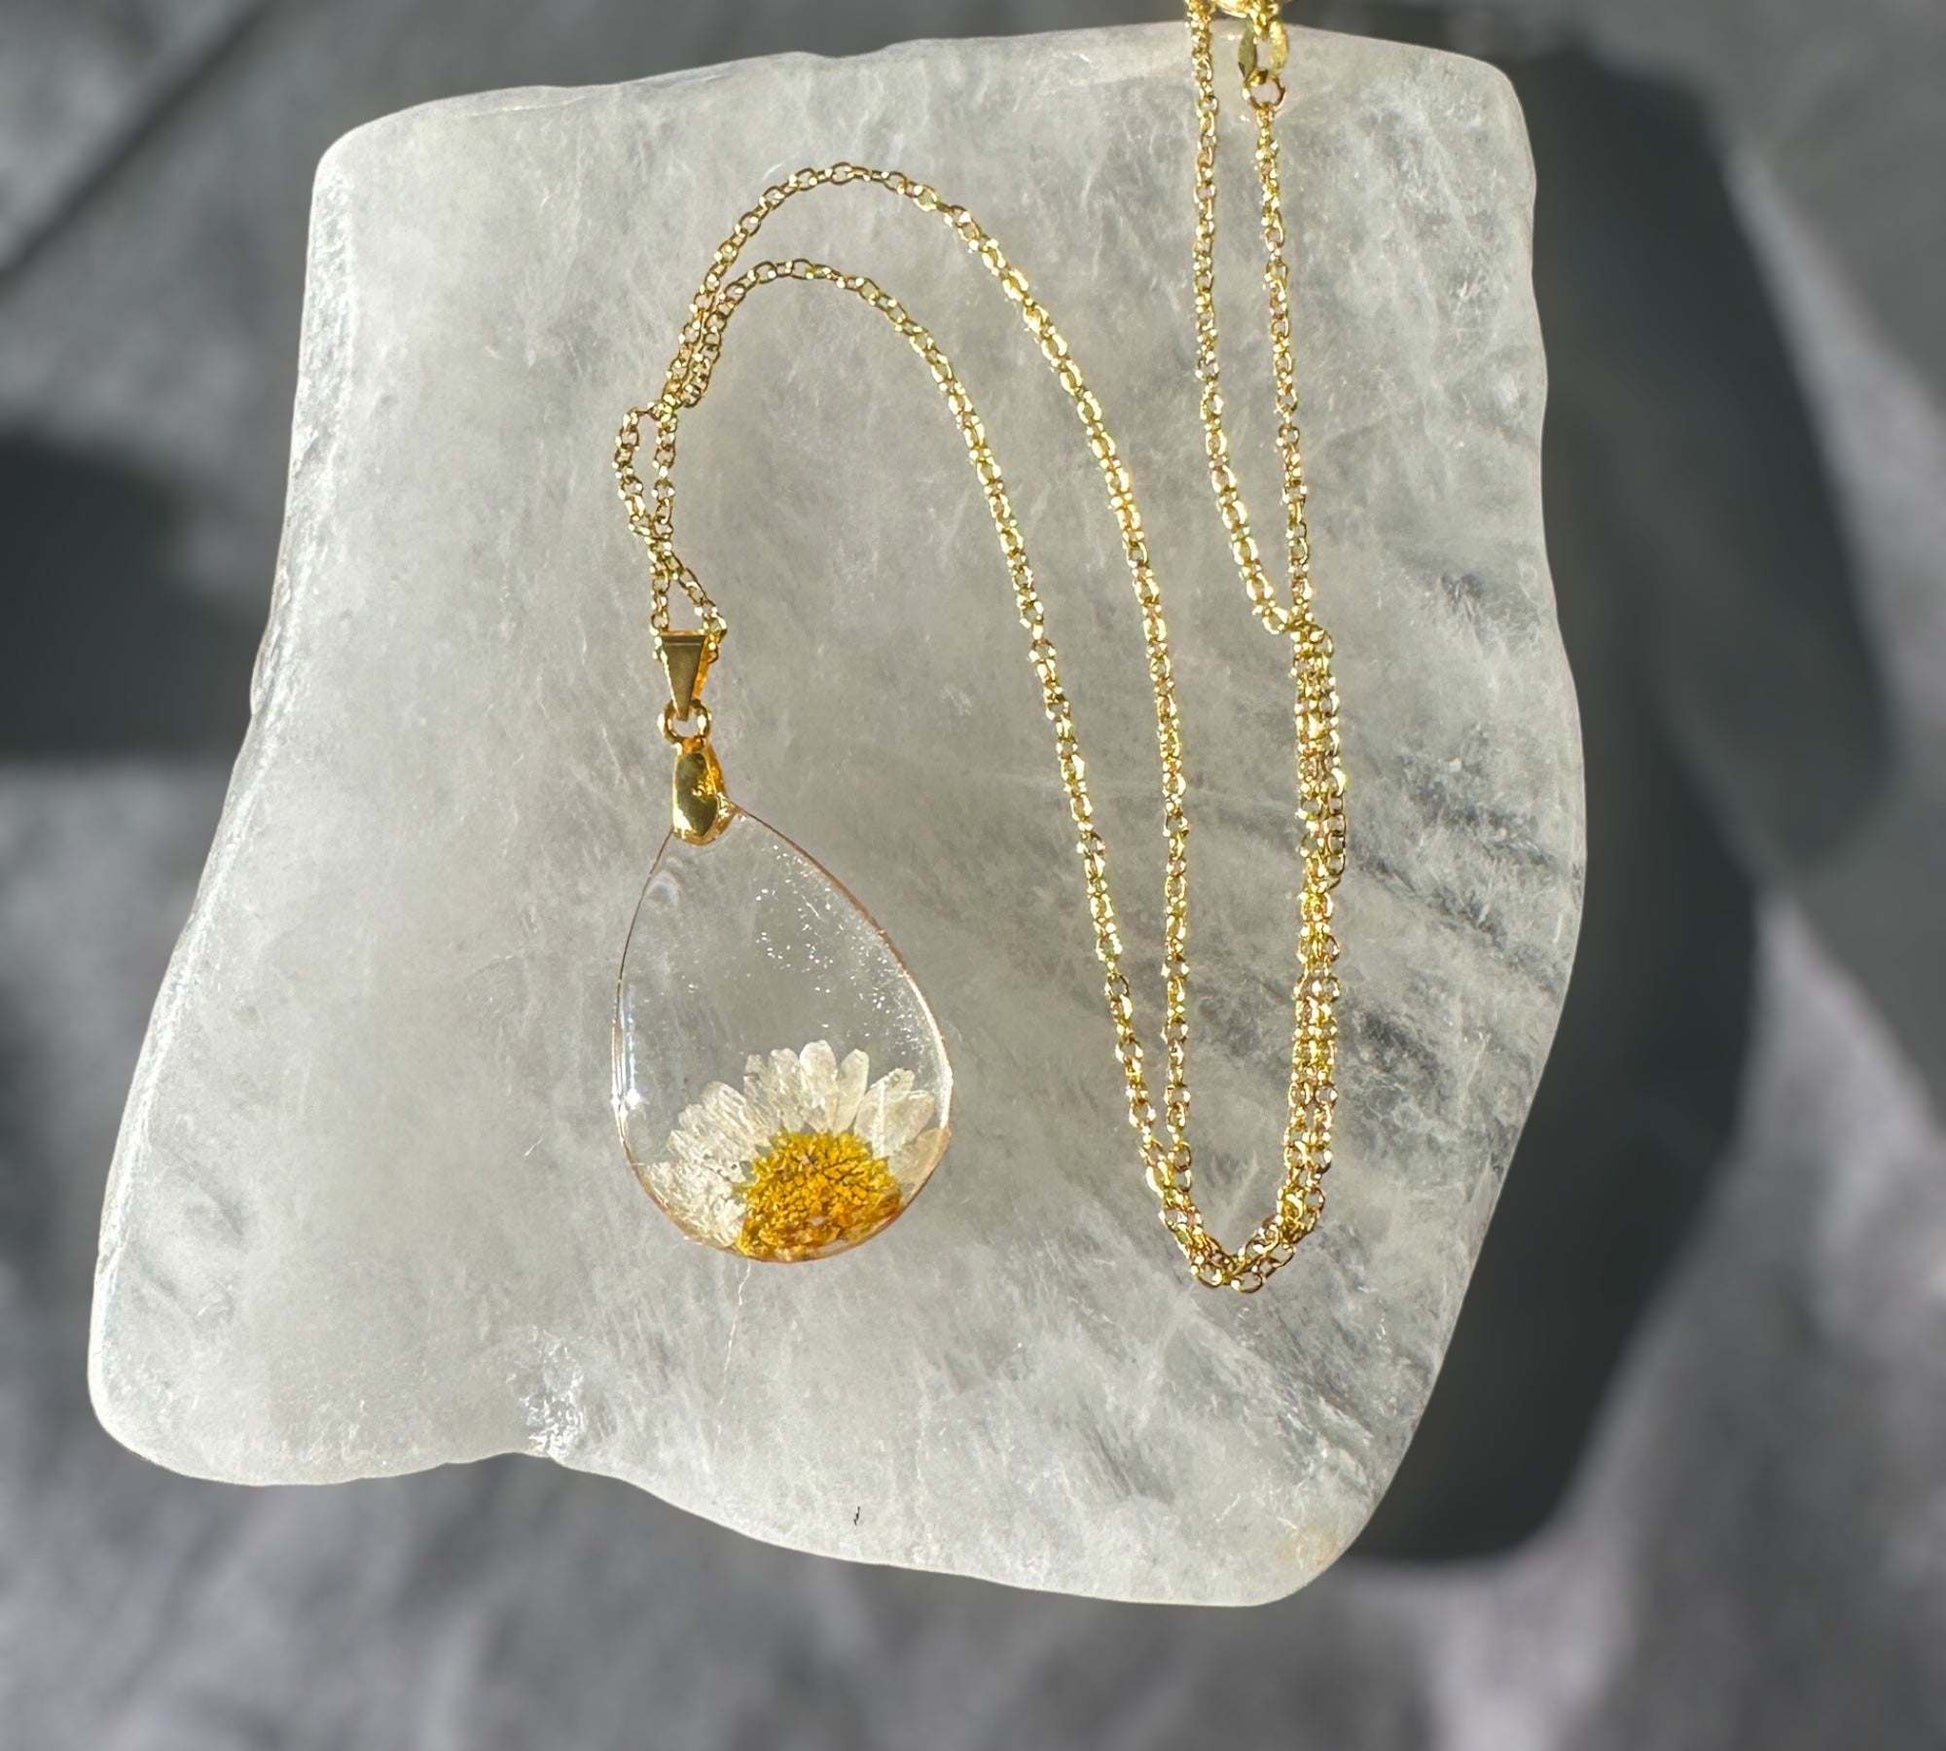 Daisy Teardrop Pendant - Real Dried Flower Jewelry in Silver and Gold 